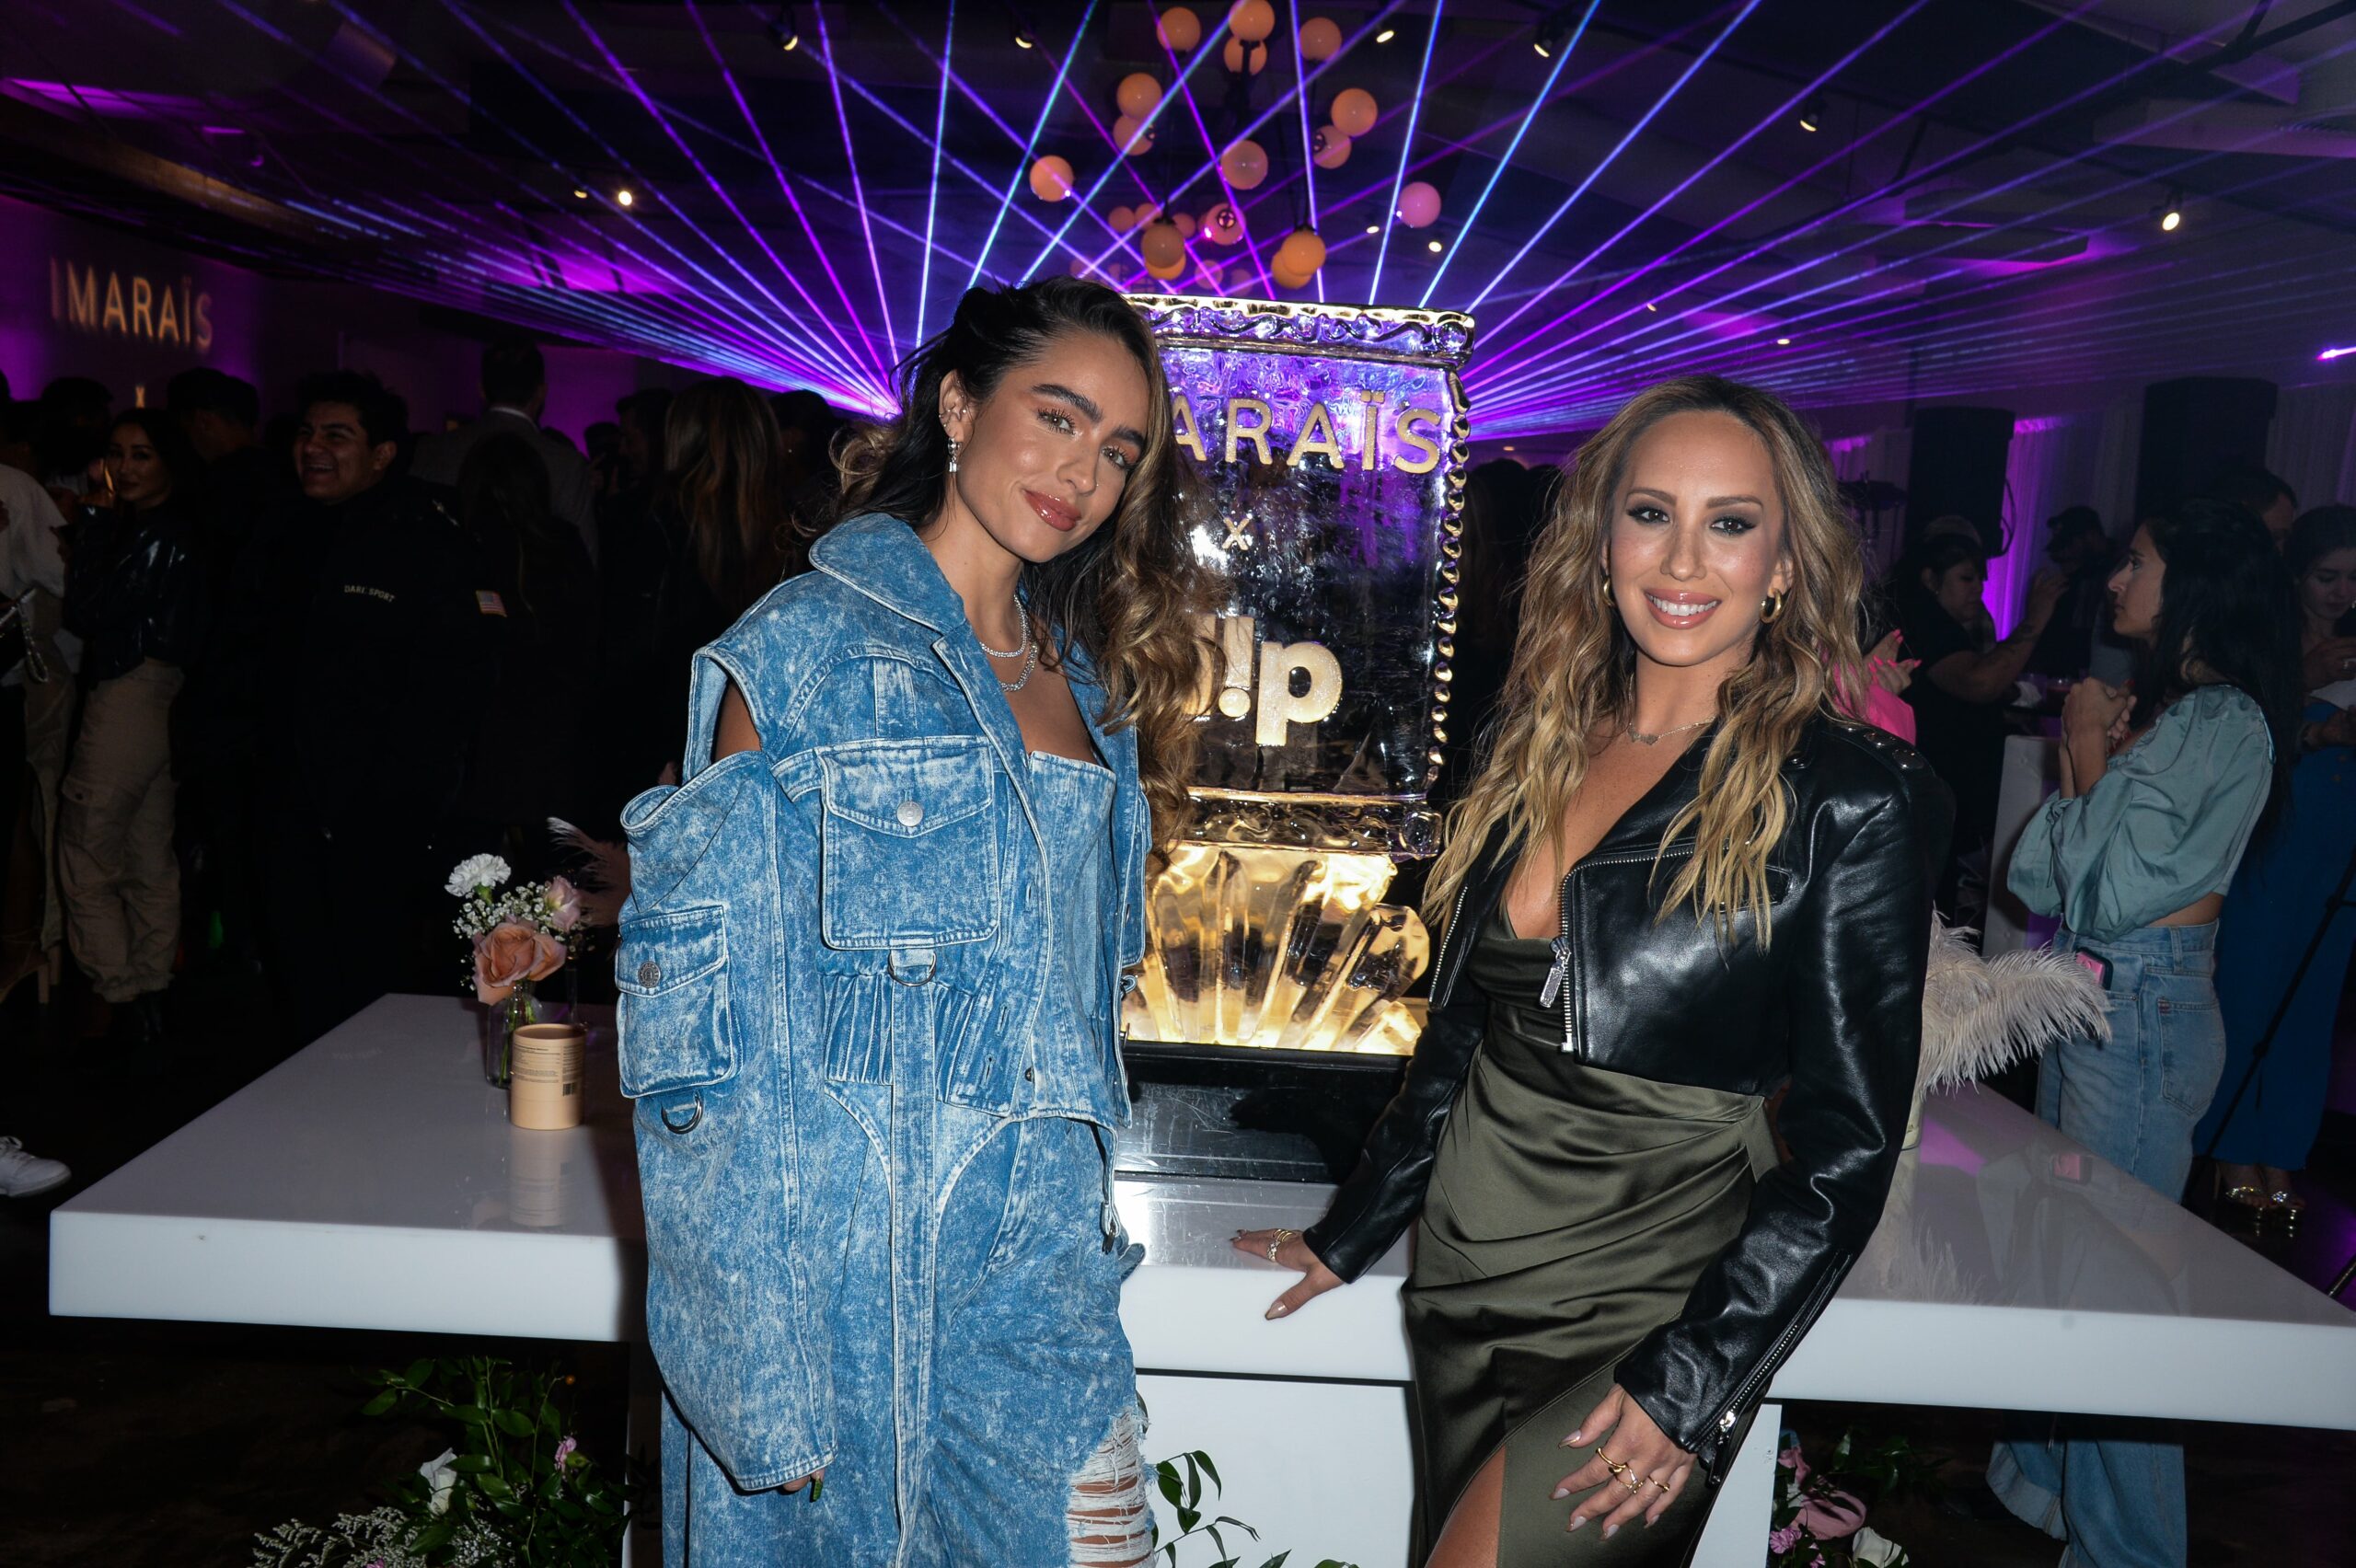 Sommer Ray and Cheryl Burke inside at the IMARAÏS Beauty x Fl!p Launch Party.